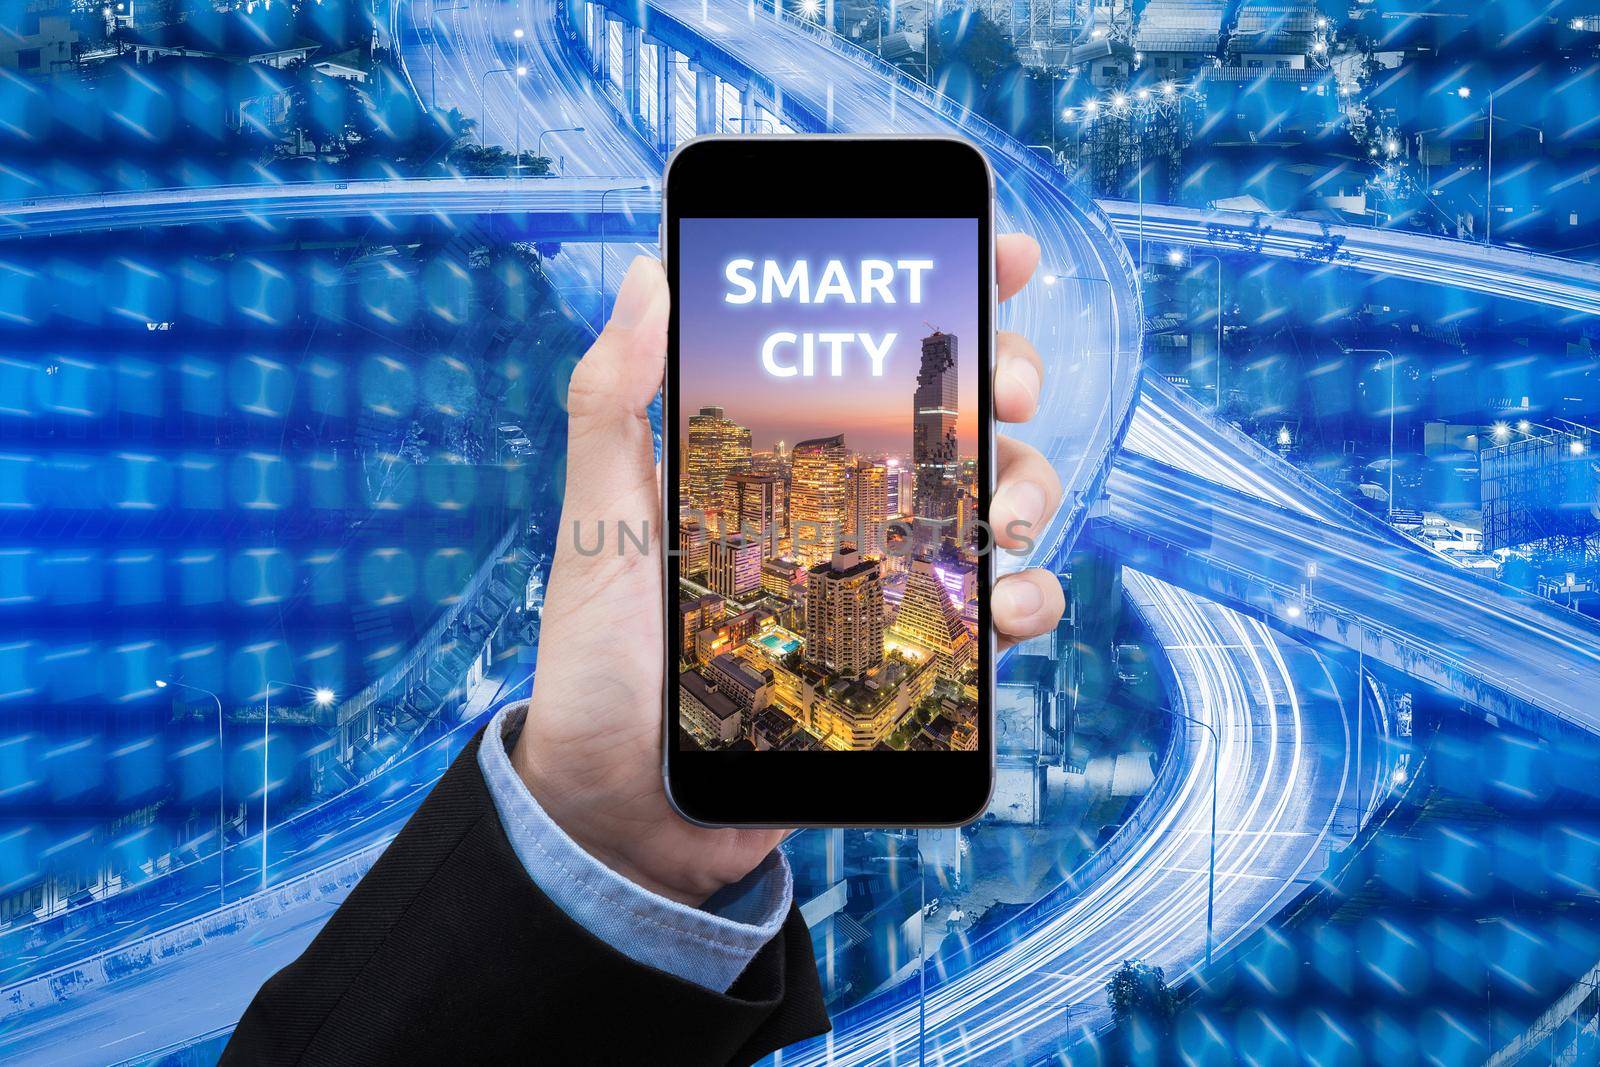 Business woman show Smart city on smart mobile phone with big data technology in background for internet of things technology concept.